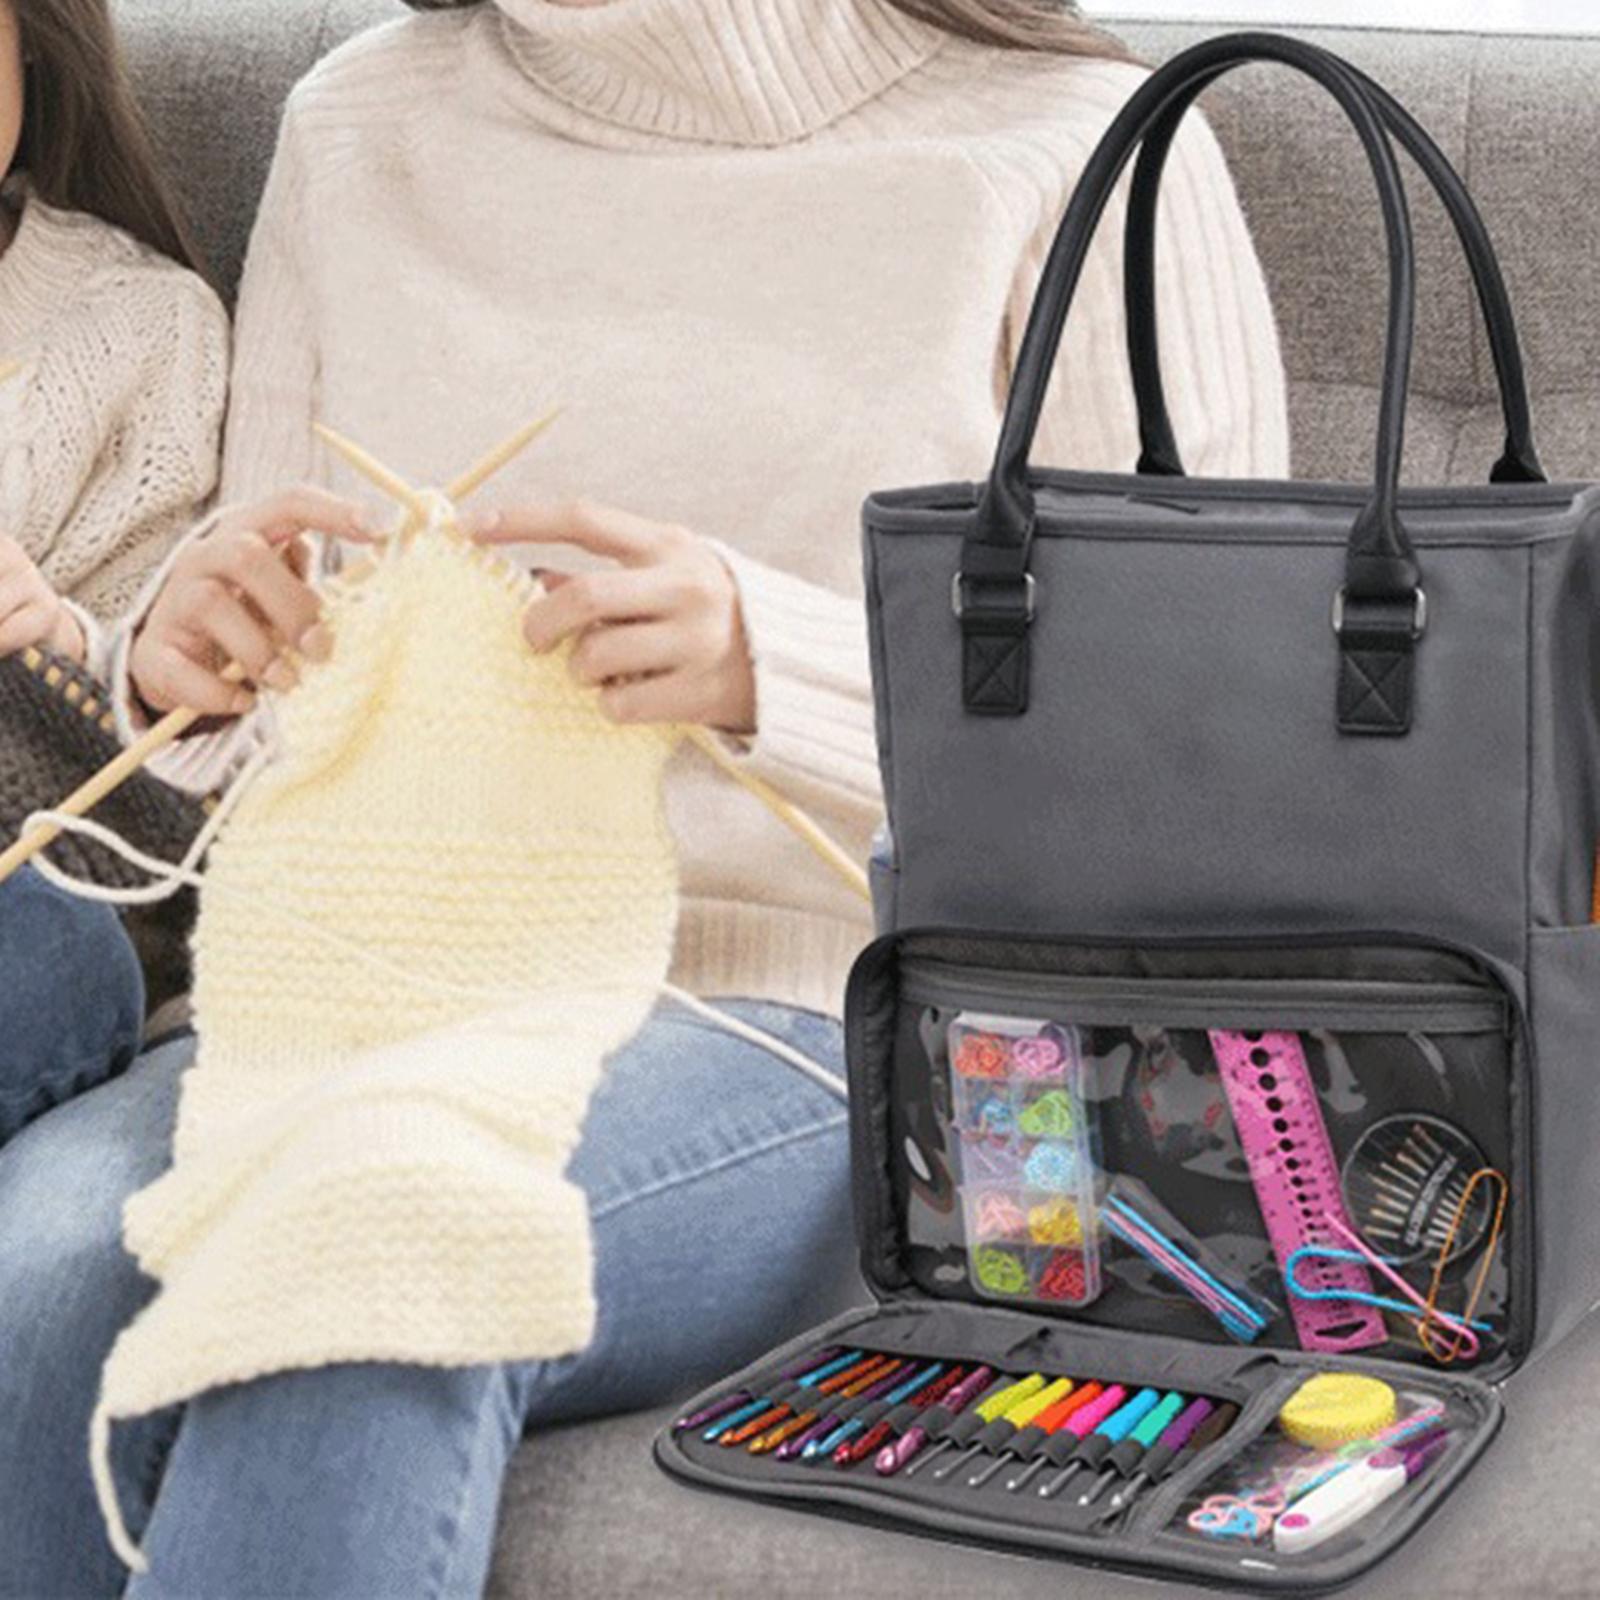 Knitting Crochet Bag Organizer Portable Tool for Carrying Projects yarn Gray